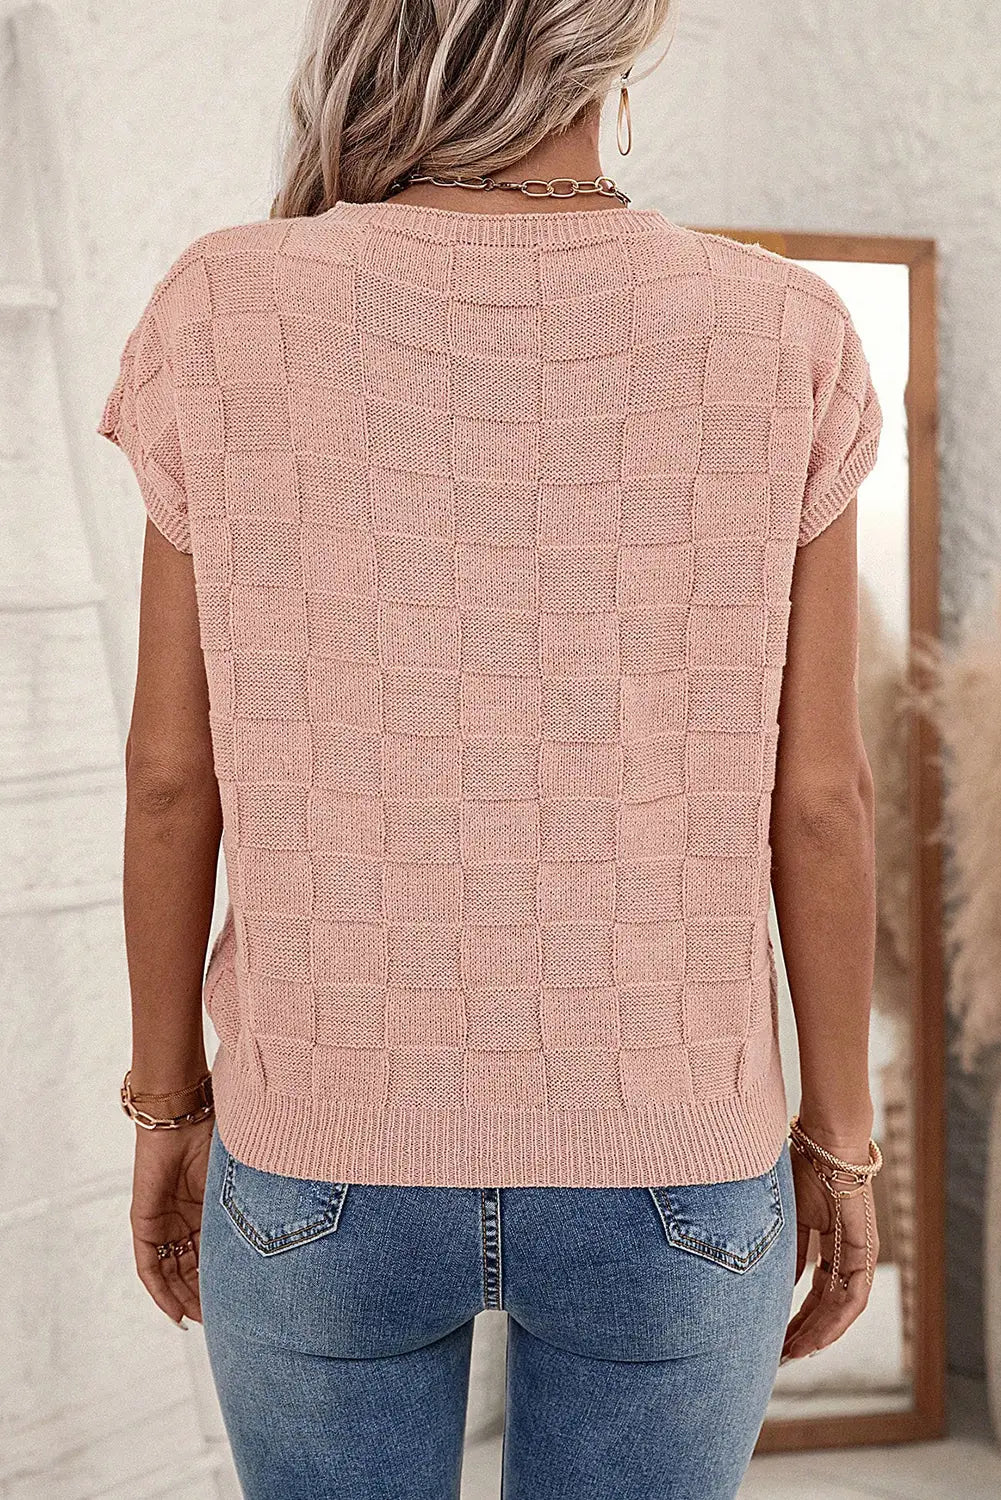 Dusty pink lattice textured knit short sleeve sweater - sweaters & cardigans